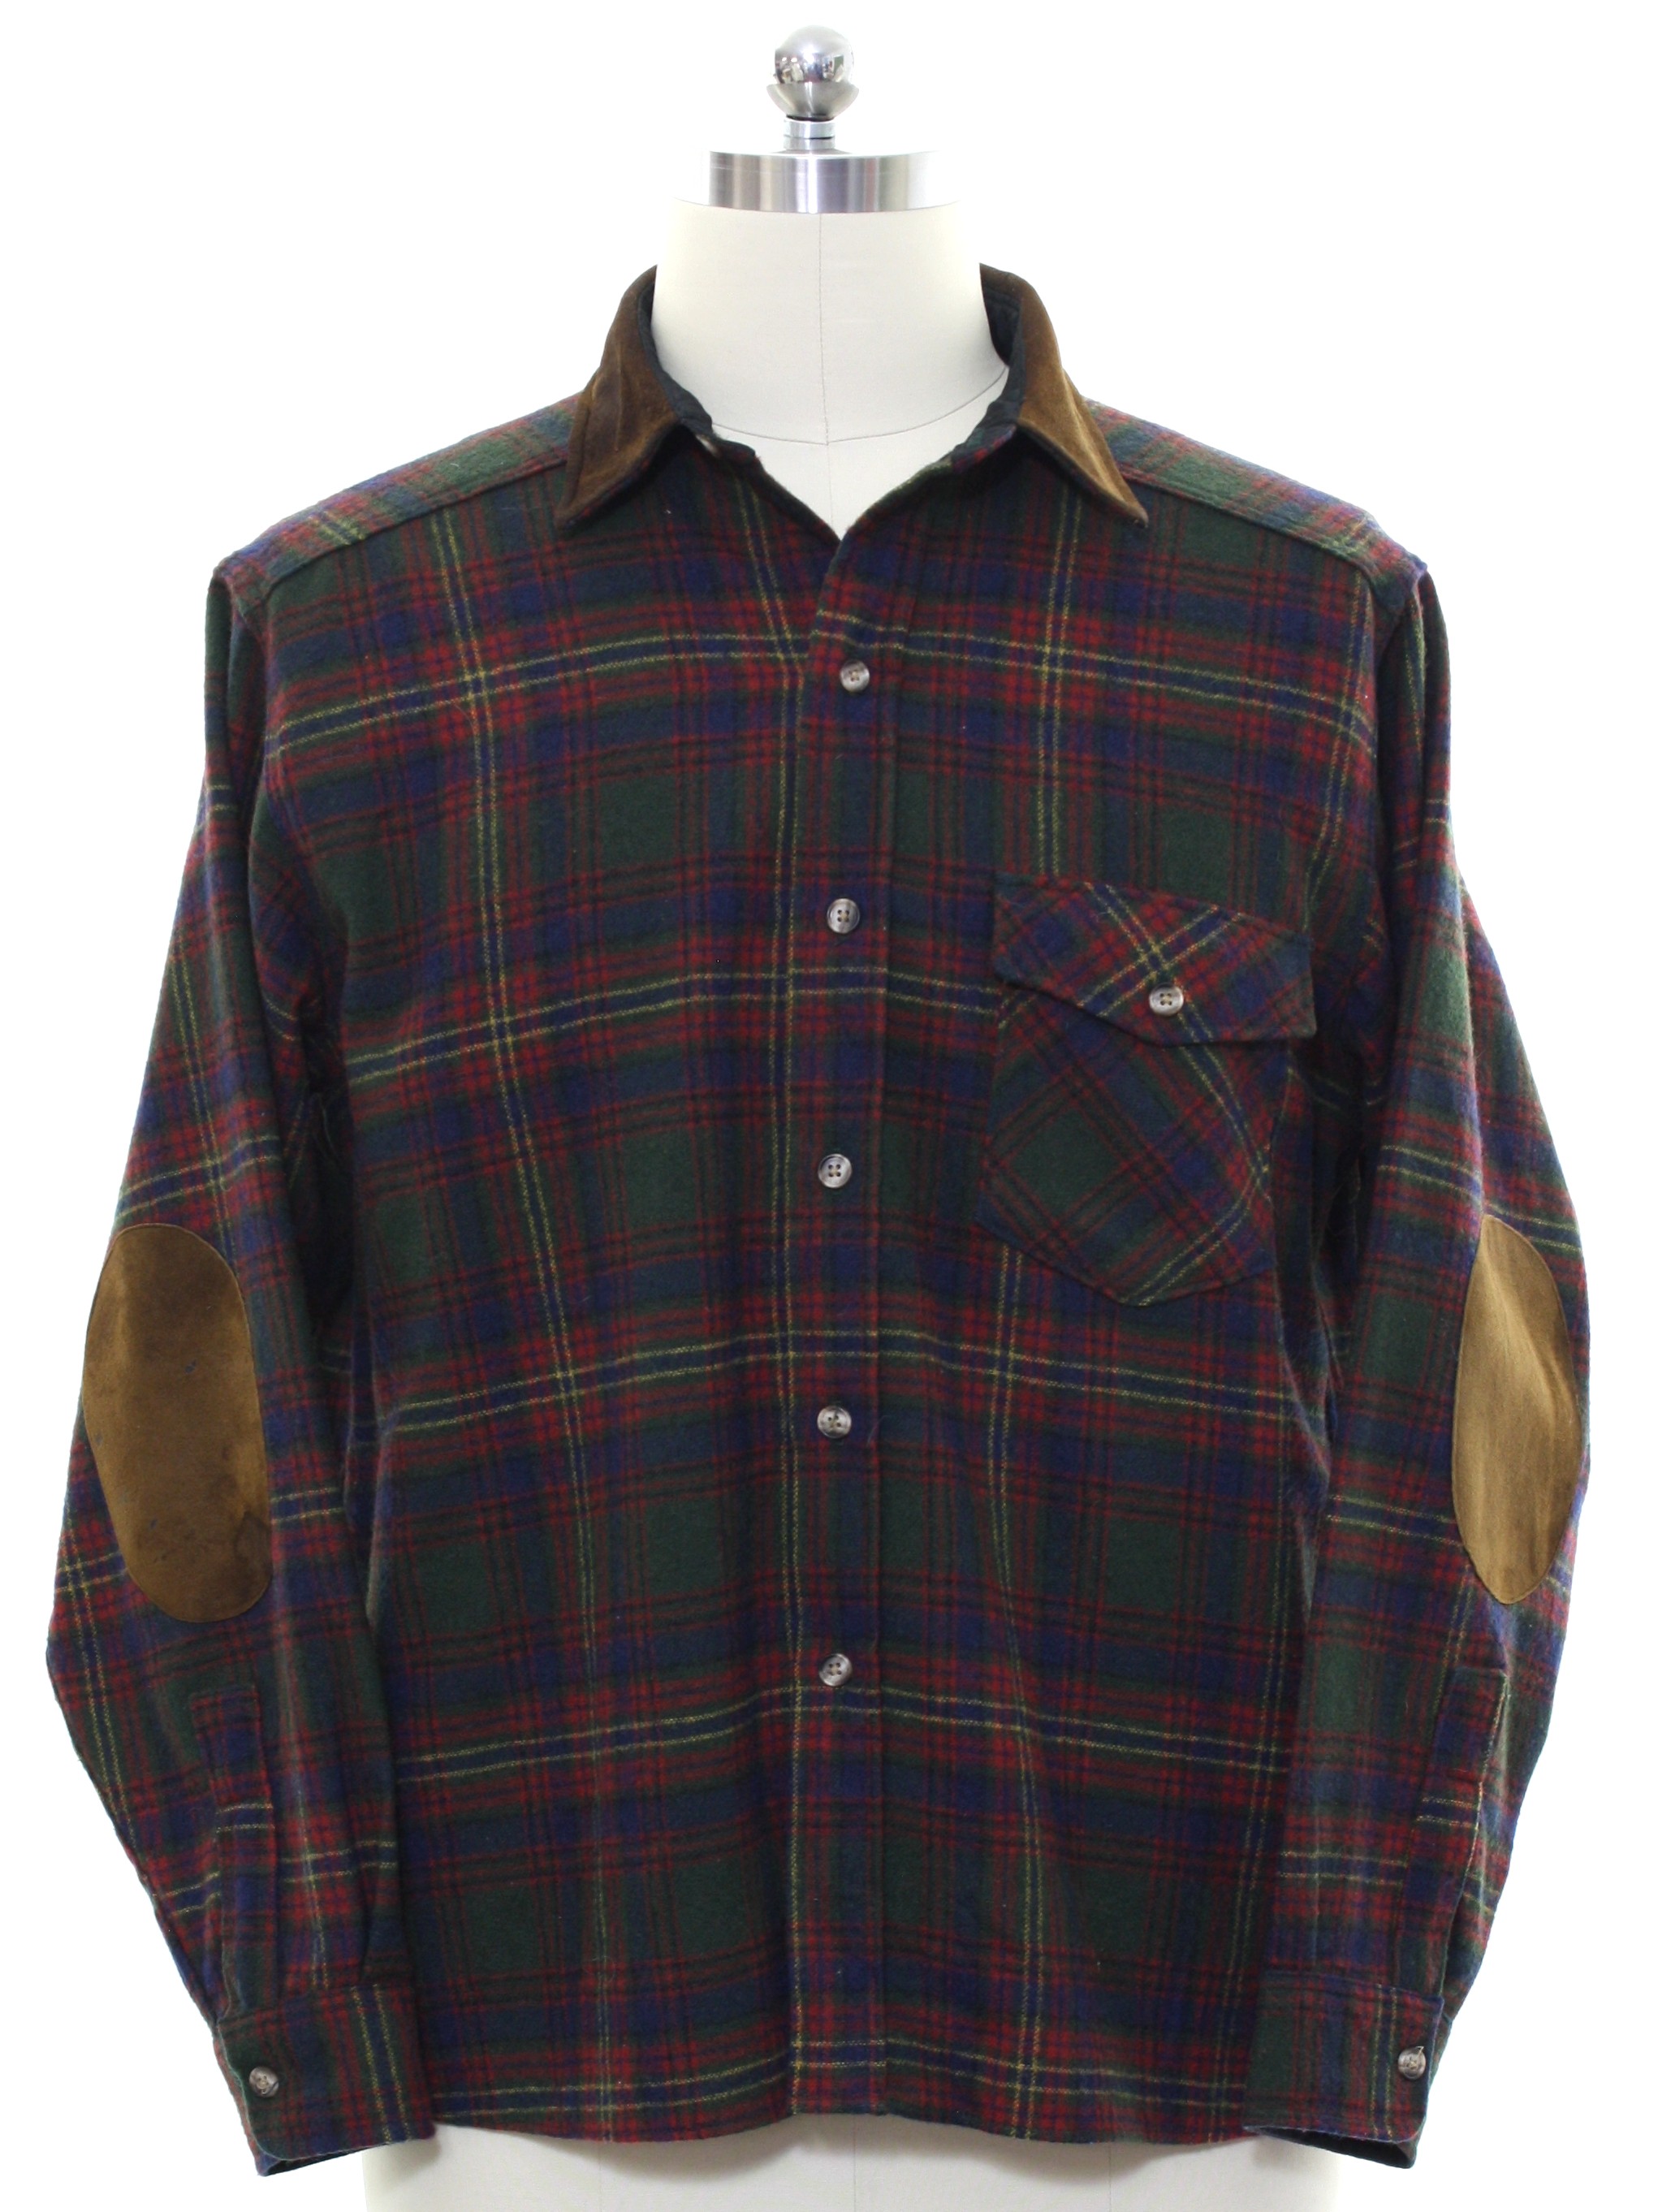 Retro 80s Shirt (Woolrich) : 80s -Woolrich- Mens multicolored ...